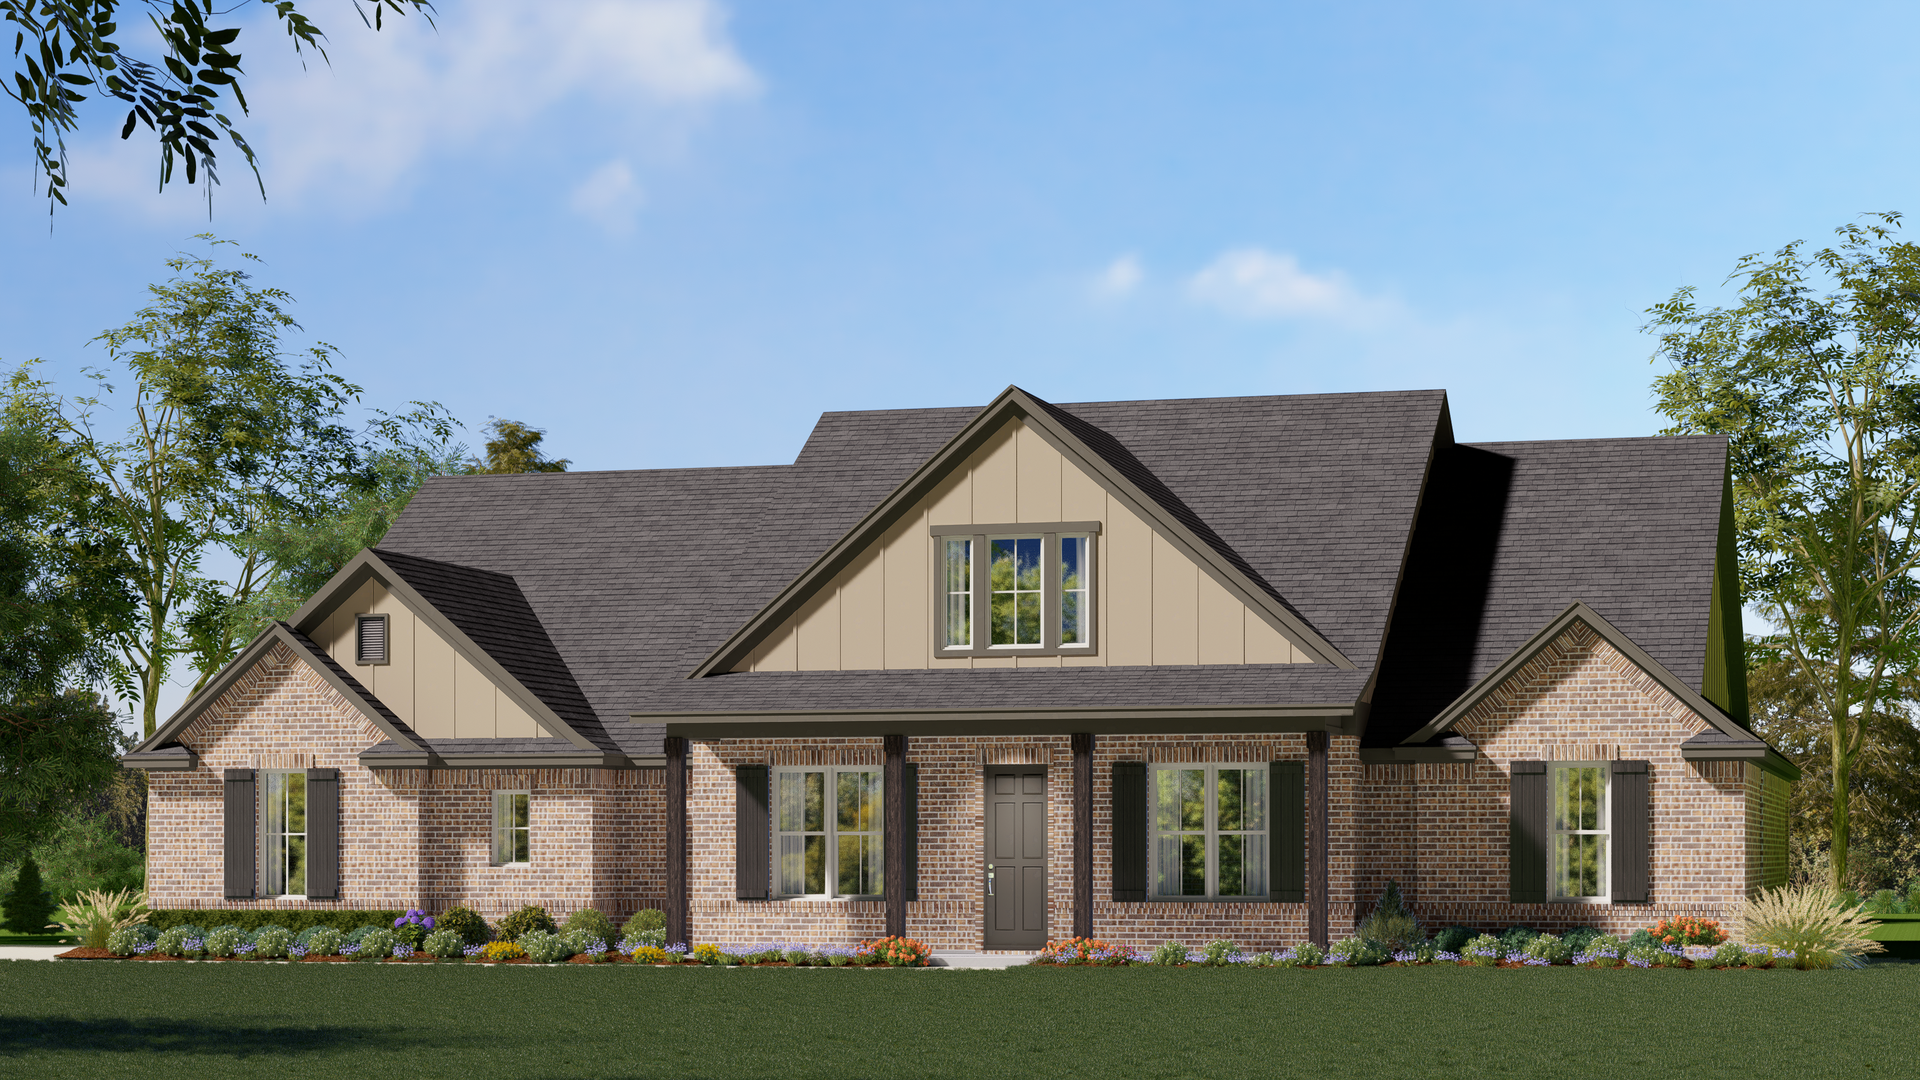 2586 C. Concept 2586 Home with 4 Bedrooms